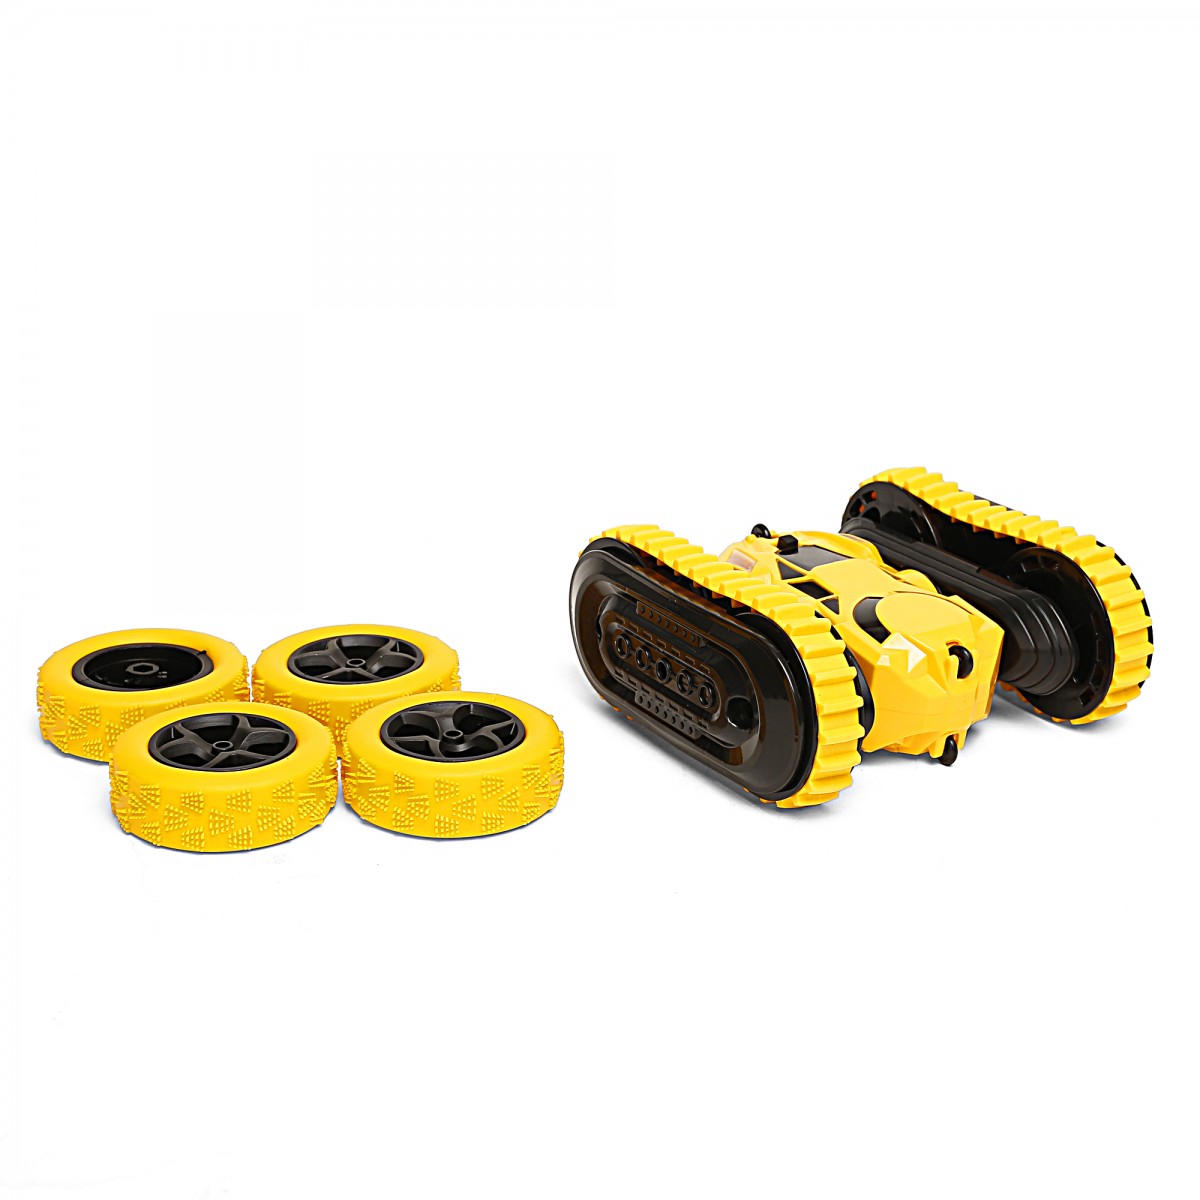 Ralleyz 2.4G 2 In1 Remote Control Stunt Car, Changeable Wheels With Charger, Yellow, 6Y+